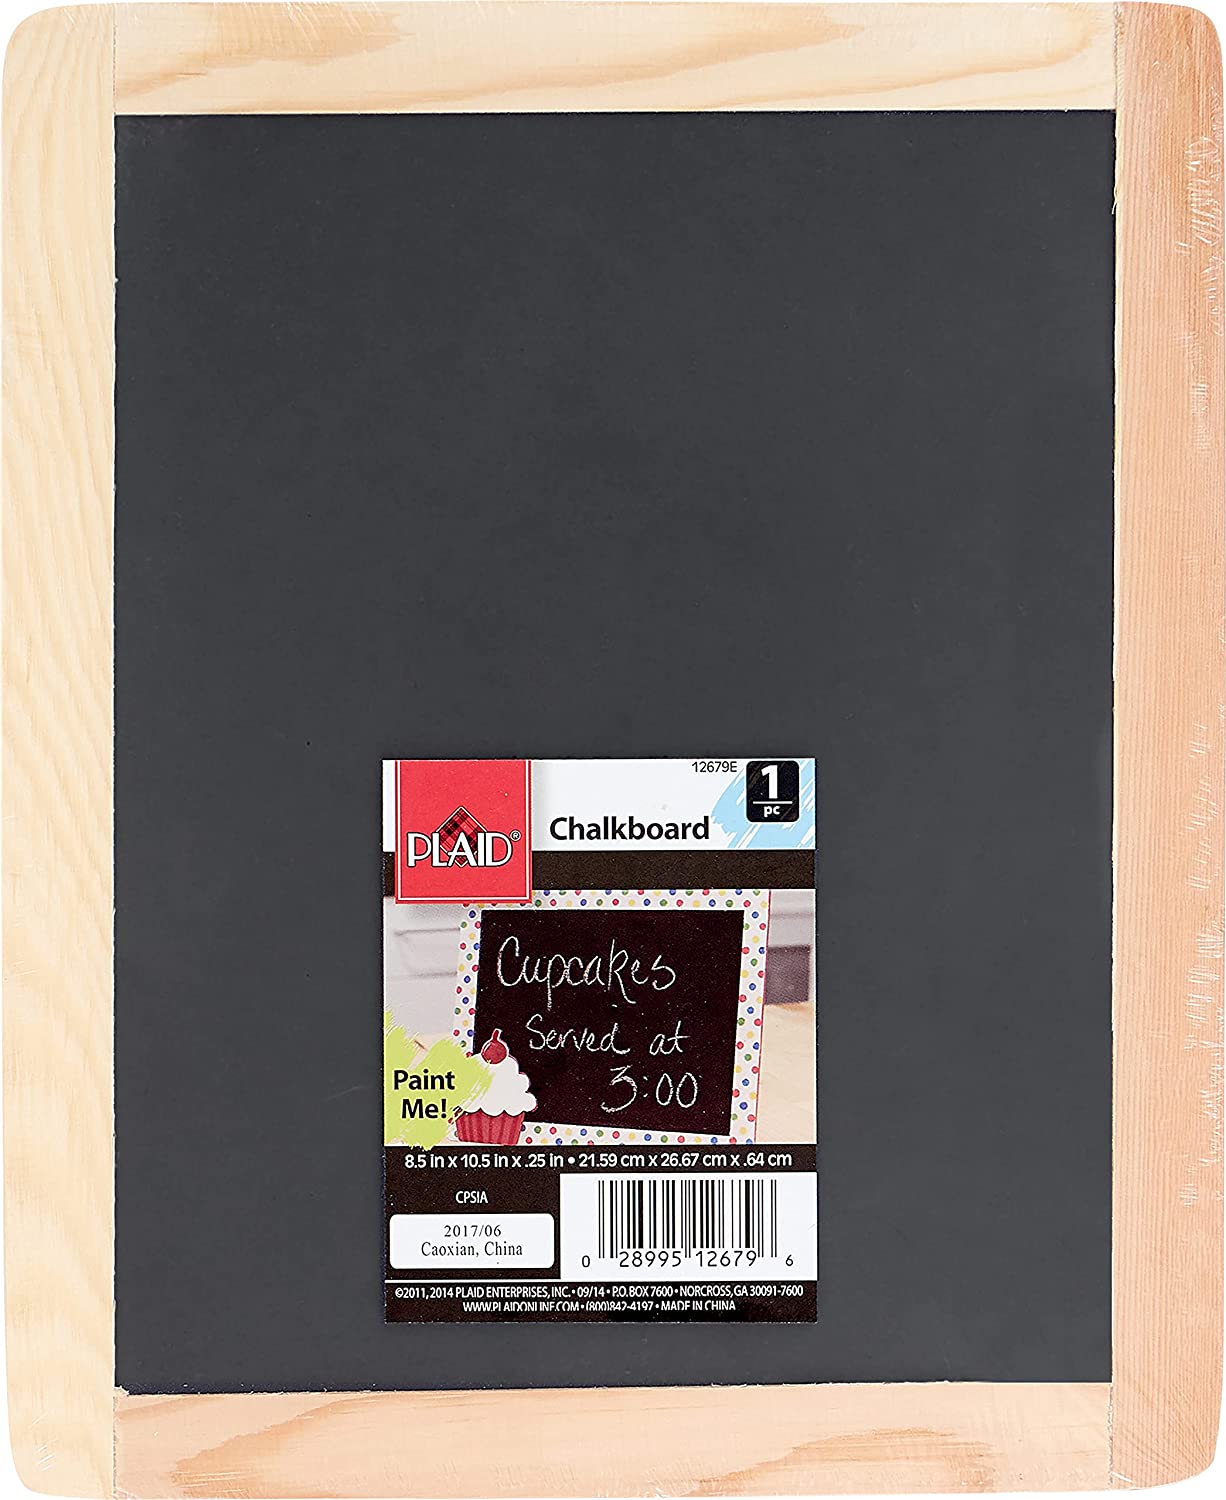 Plaid Paintable Frame Double Sided Chalkboard